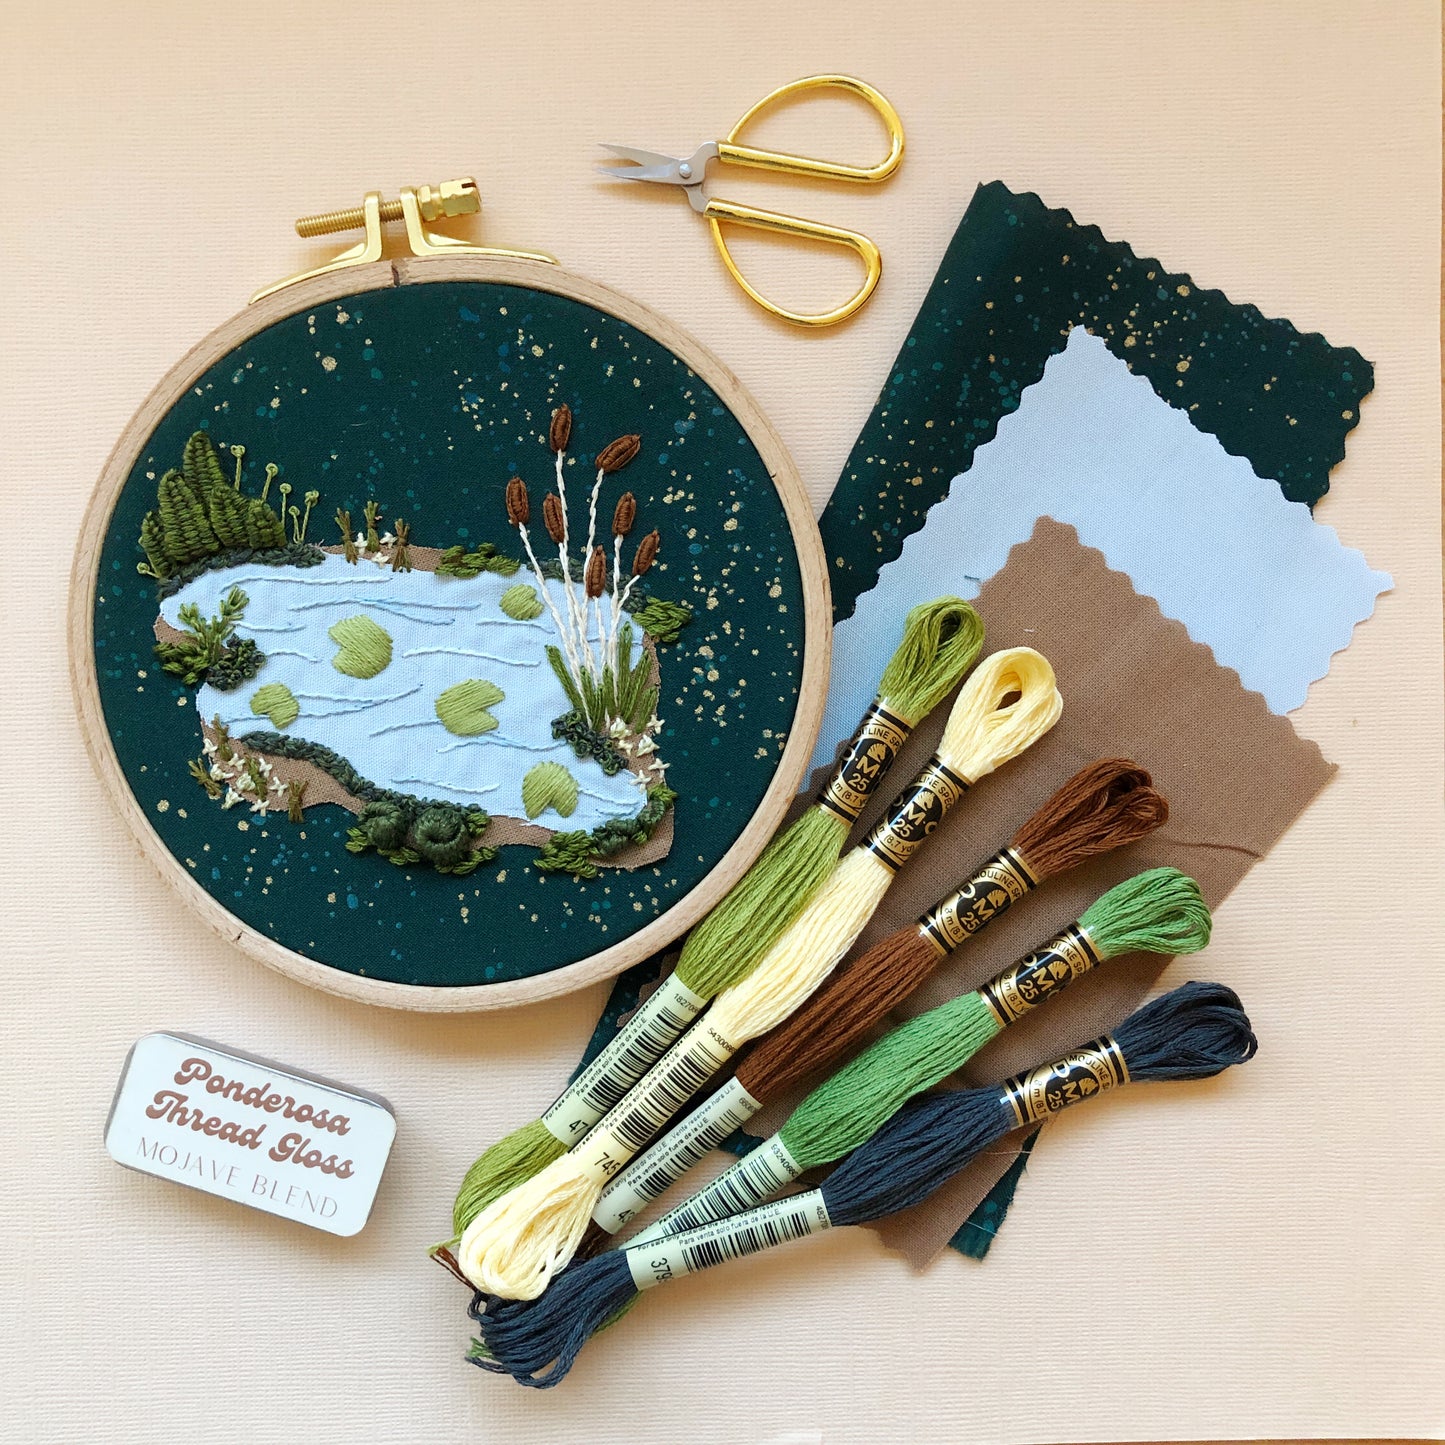 3D Lily Pad Pond - Advanced Hand Embroidery DIY Craft Kit